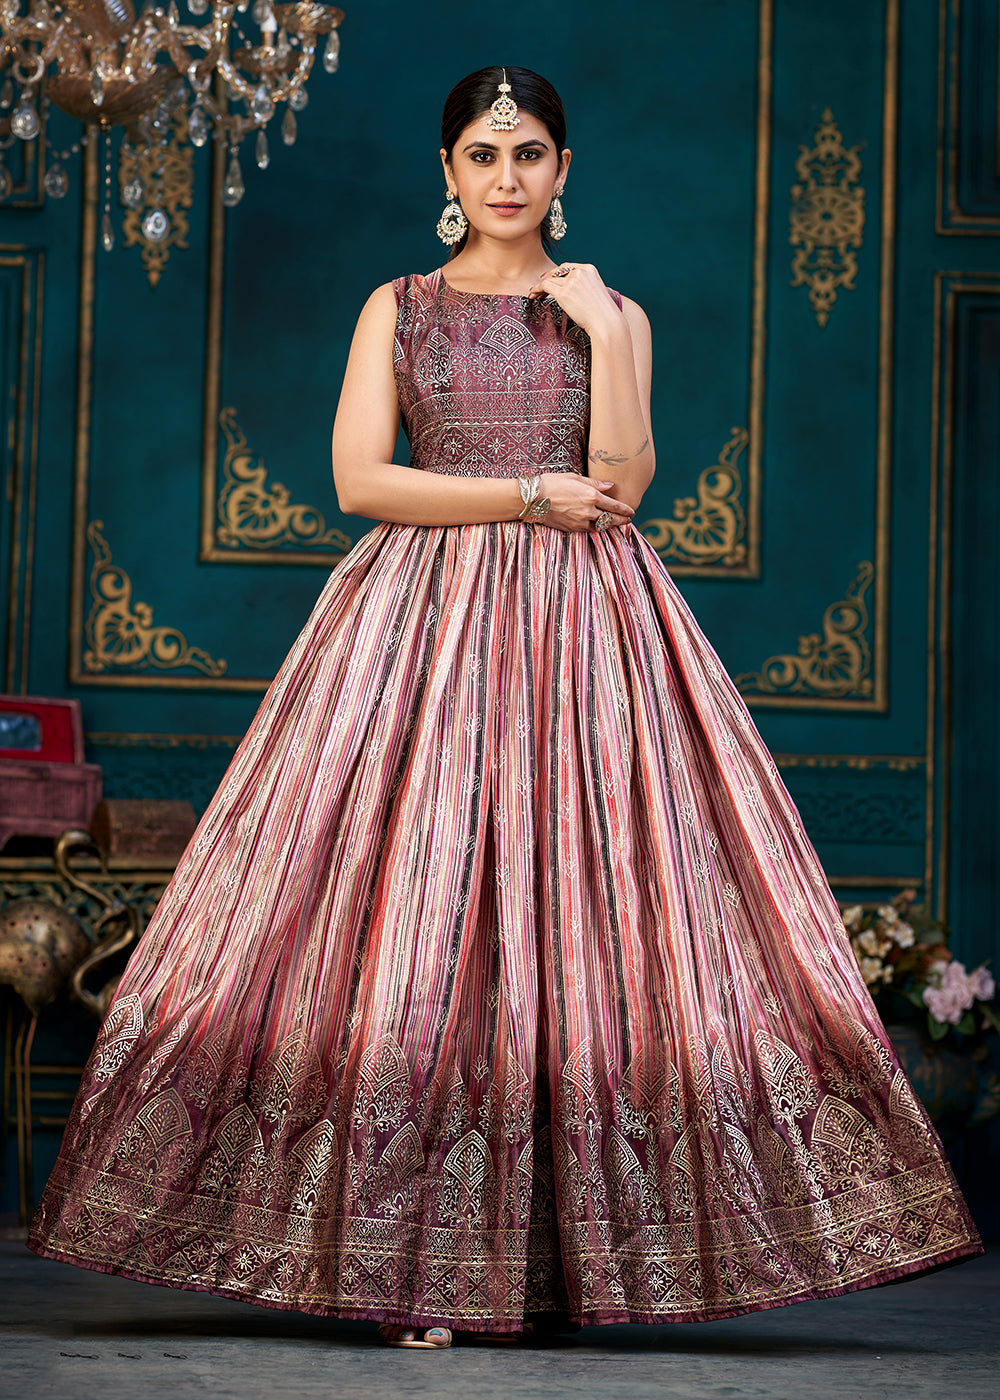 Buy Now Pretty Multicolor Digital Foil Printed Ready to Wear Gown Online in USA, UK, Australia, New Zealand, Canada & Worldwide at Empress Clothing.